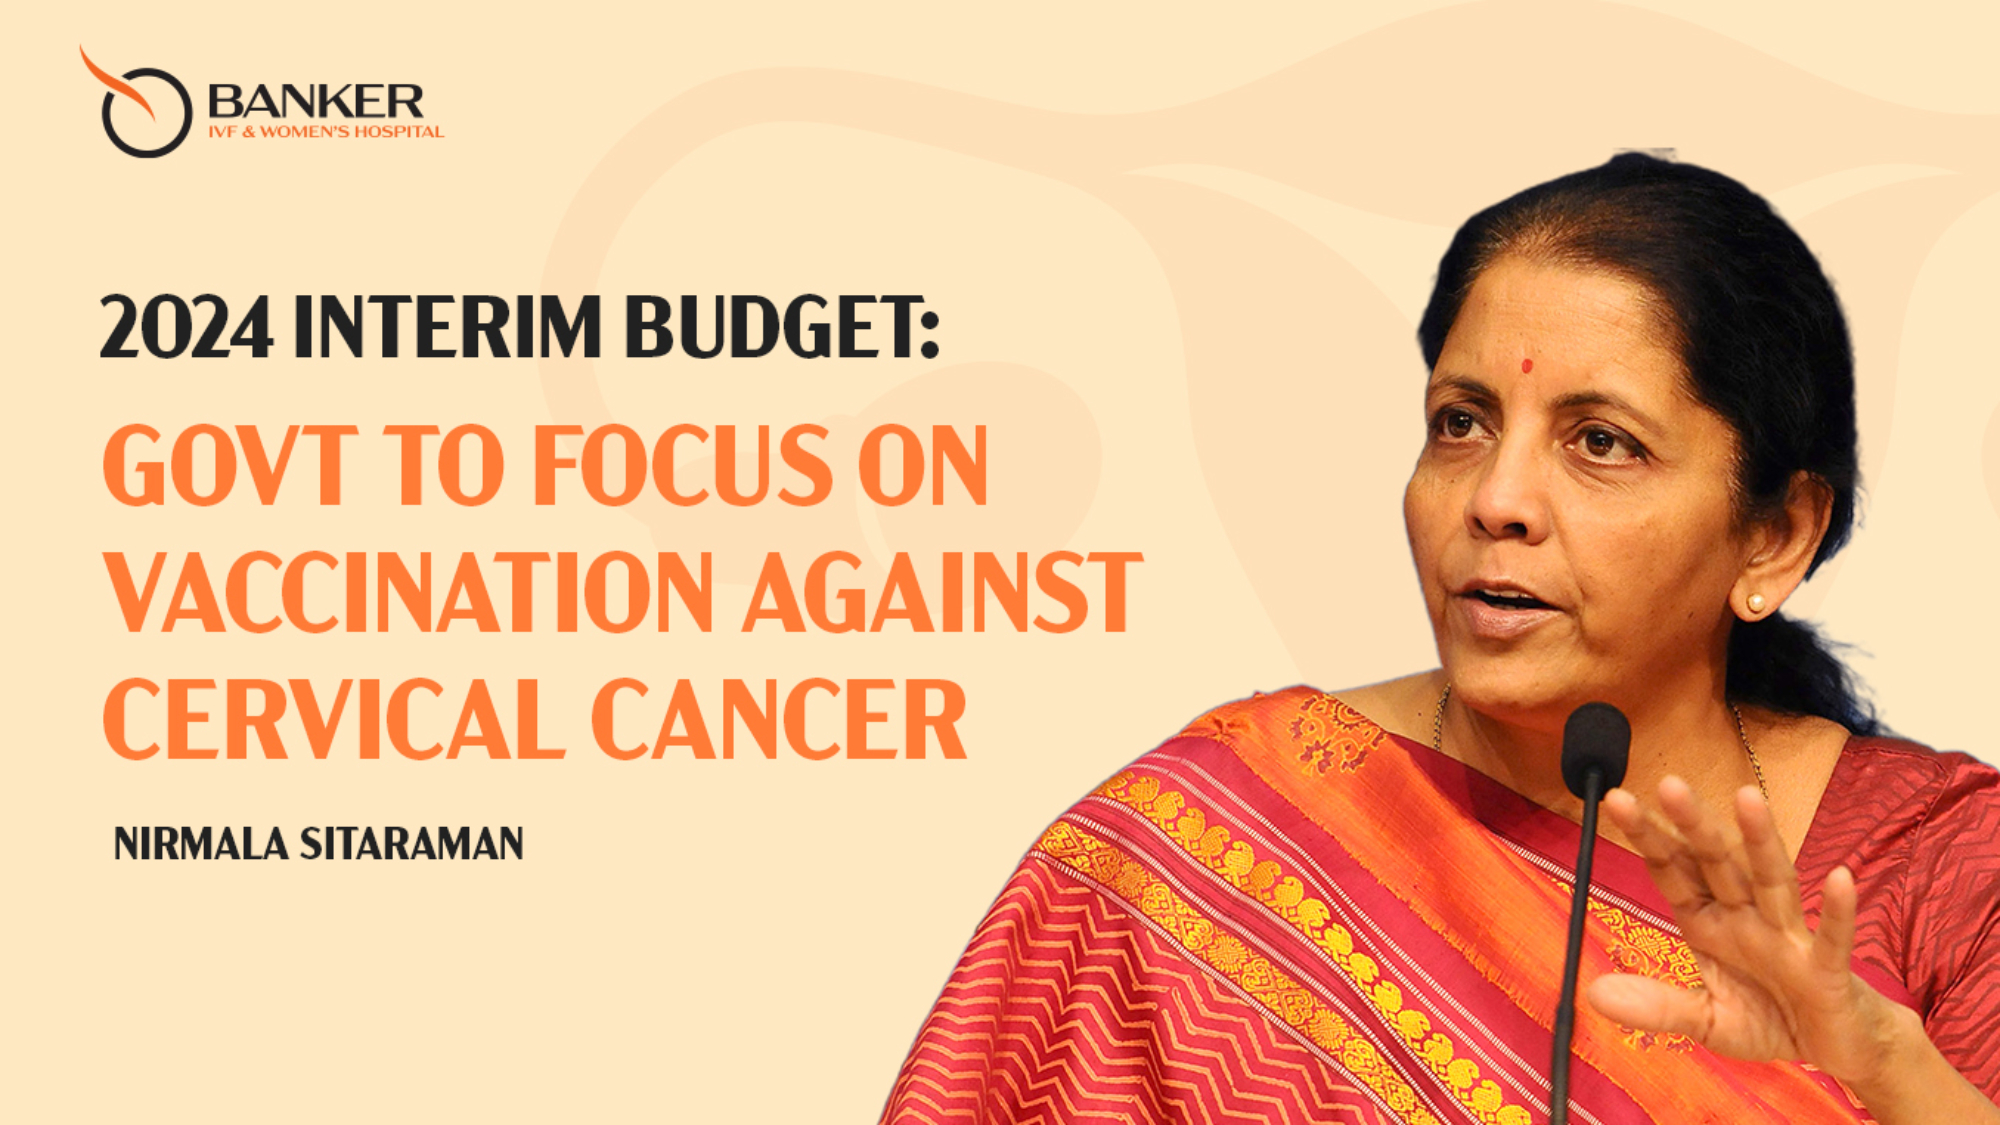 Finance Minister Nirmala Sitharaman Unveils Government's Initiatives in the 2024 Interim Budget